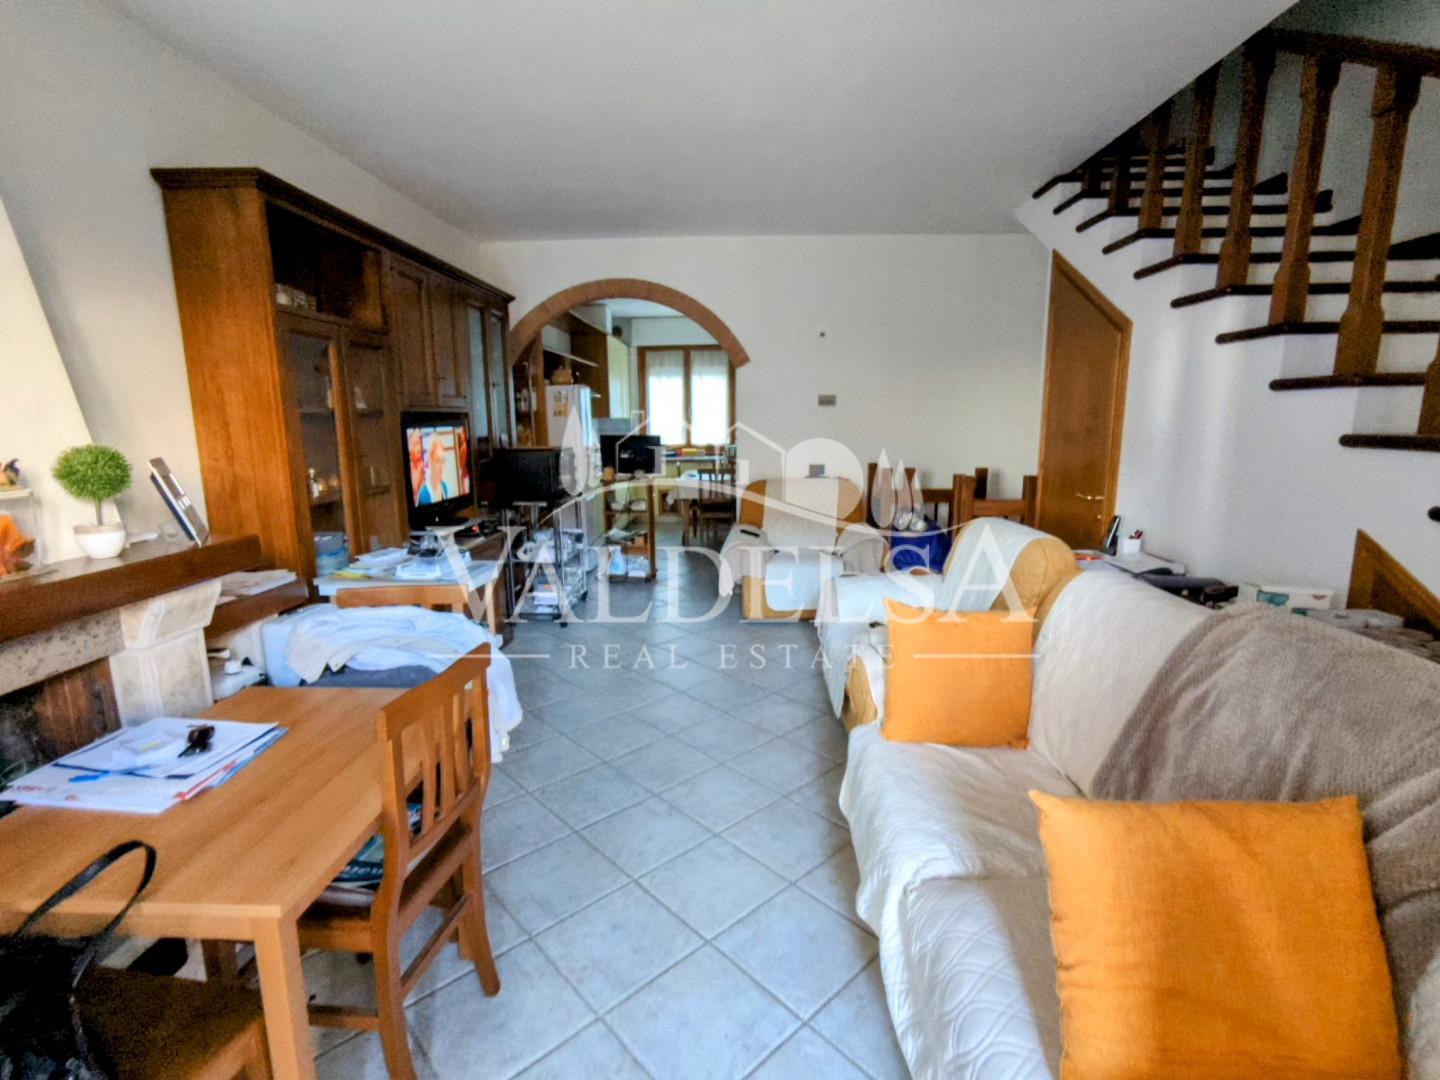 Townhouses for sale in Colle di Val d'Elsa (SI)